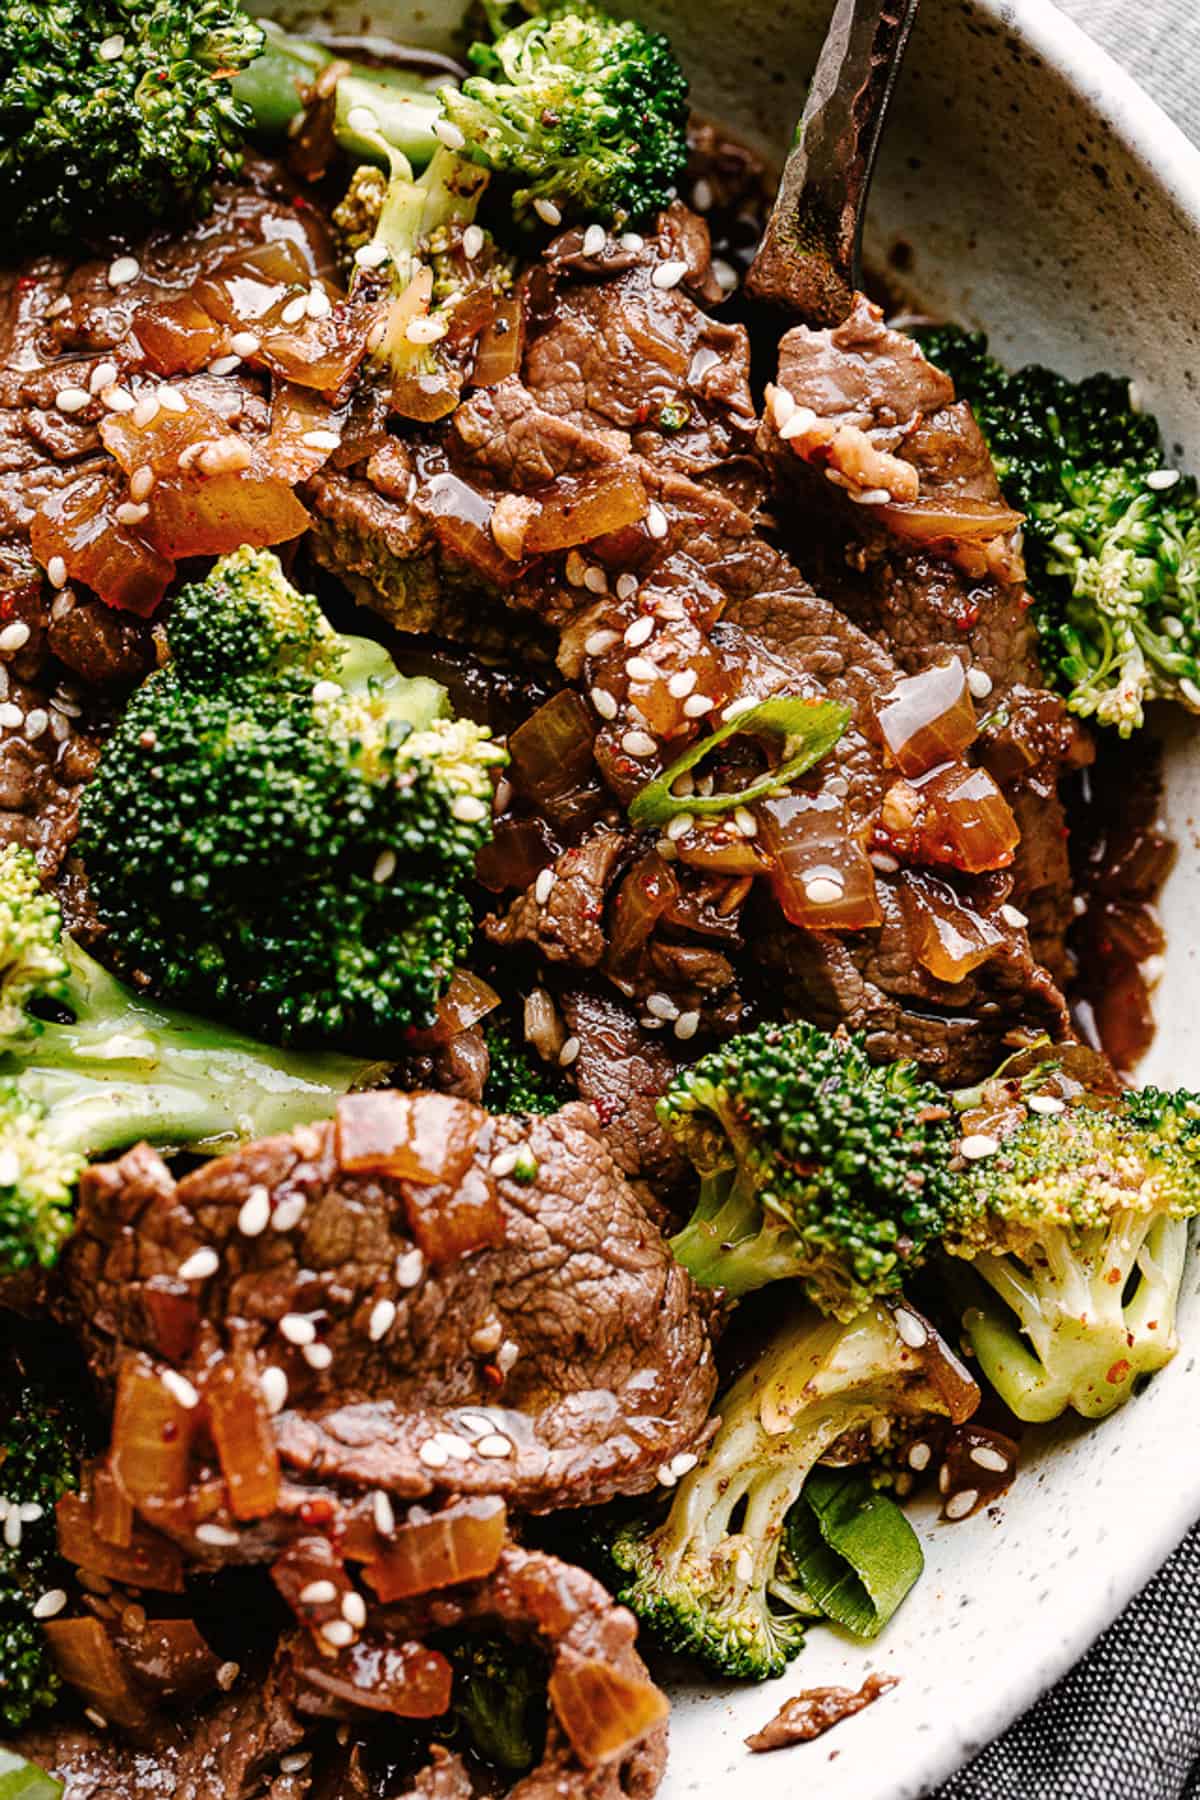 up close shot of Beef and Broccoli garnished with sesame seeds.